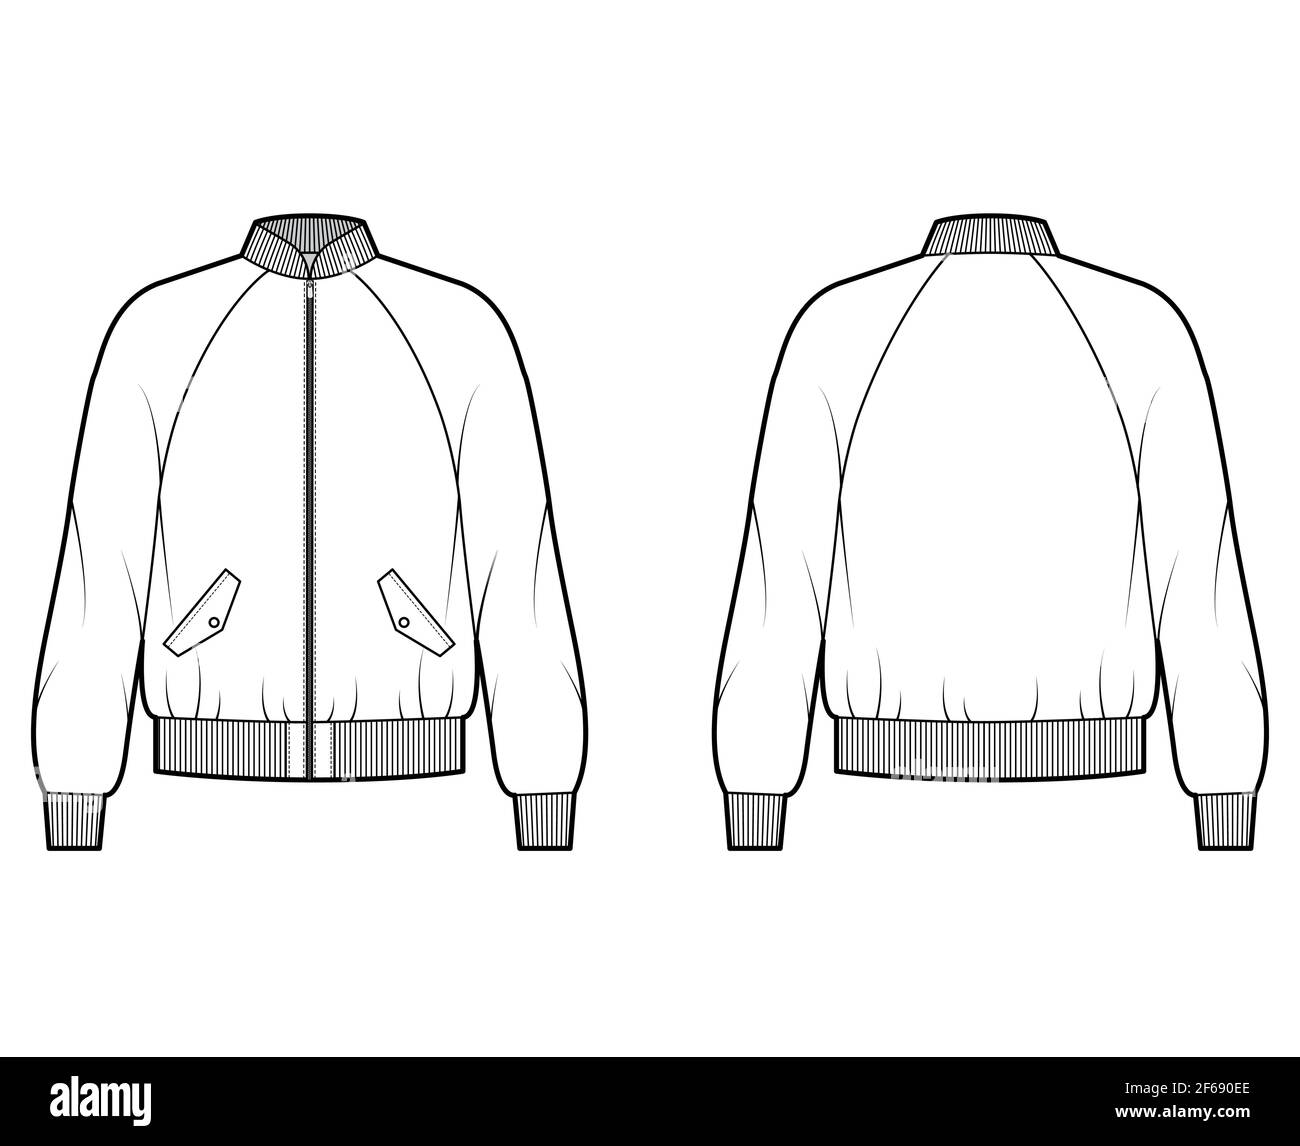 Zip-up Bomber ma-1 flight jacket technical fashion illustration with Rib collar, cuffs, long raglan sleeves, flap pockets. Flat coat template front, back white color. Women men unisex top CAD mockup Stock Vector